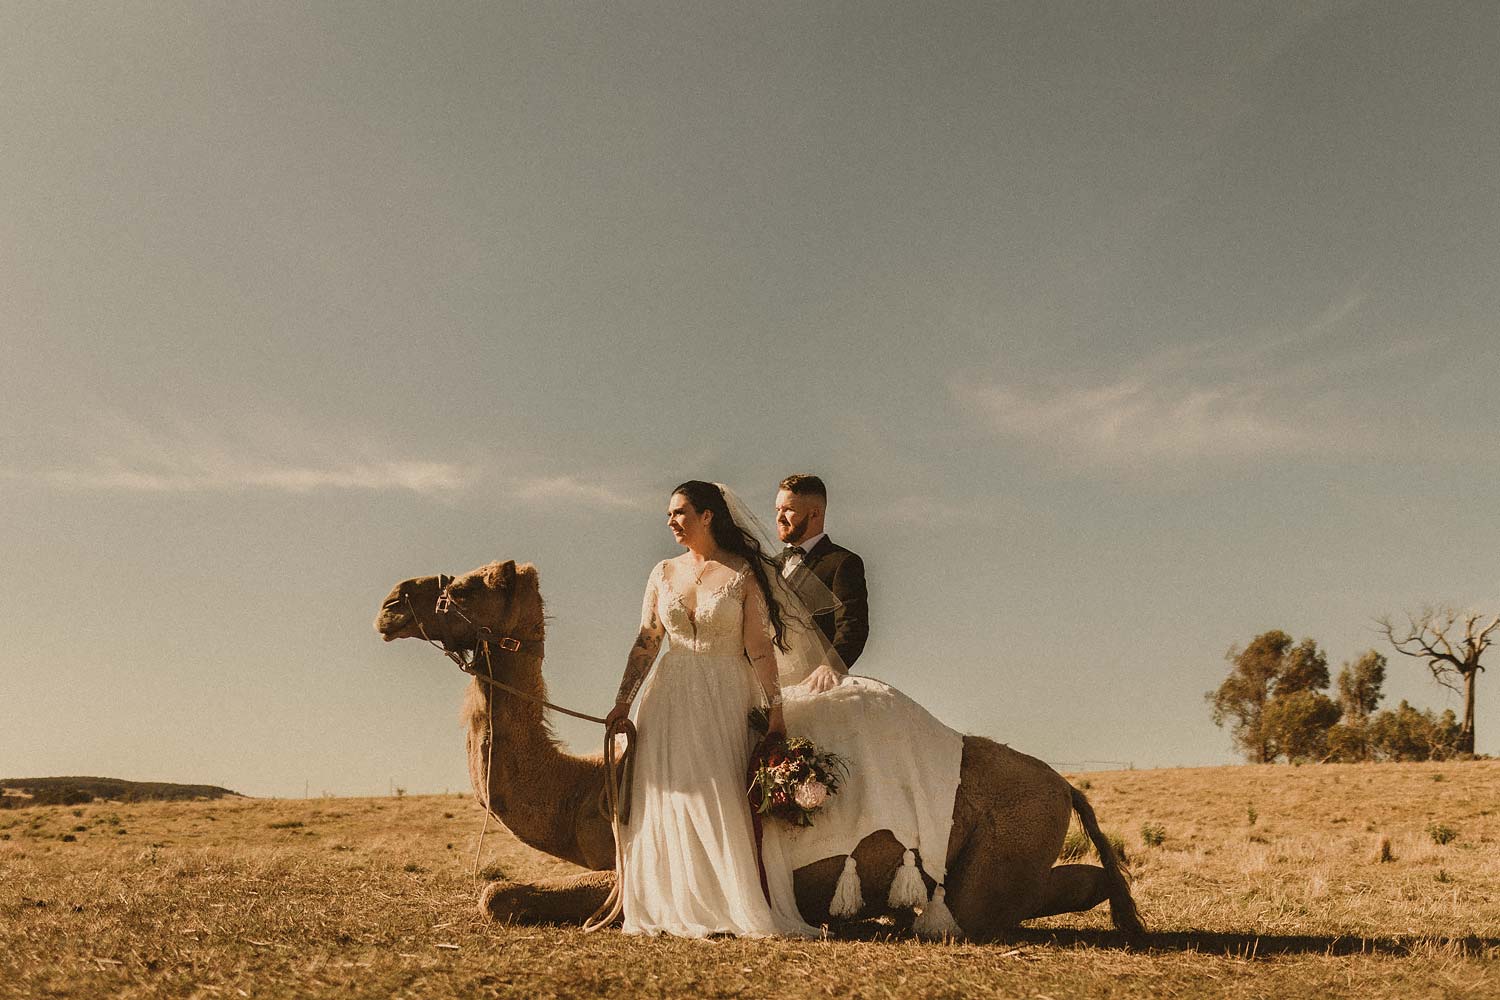 Sydney-wedding-photographer-couple-and-camel-looking-out-7